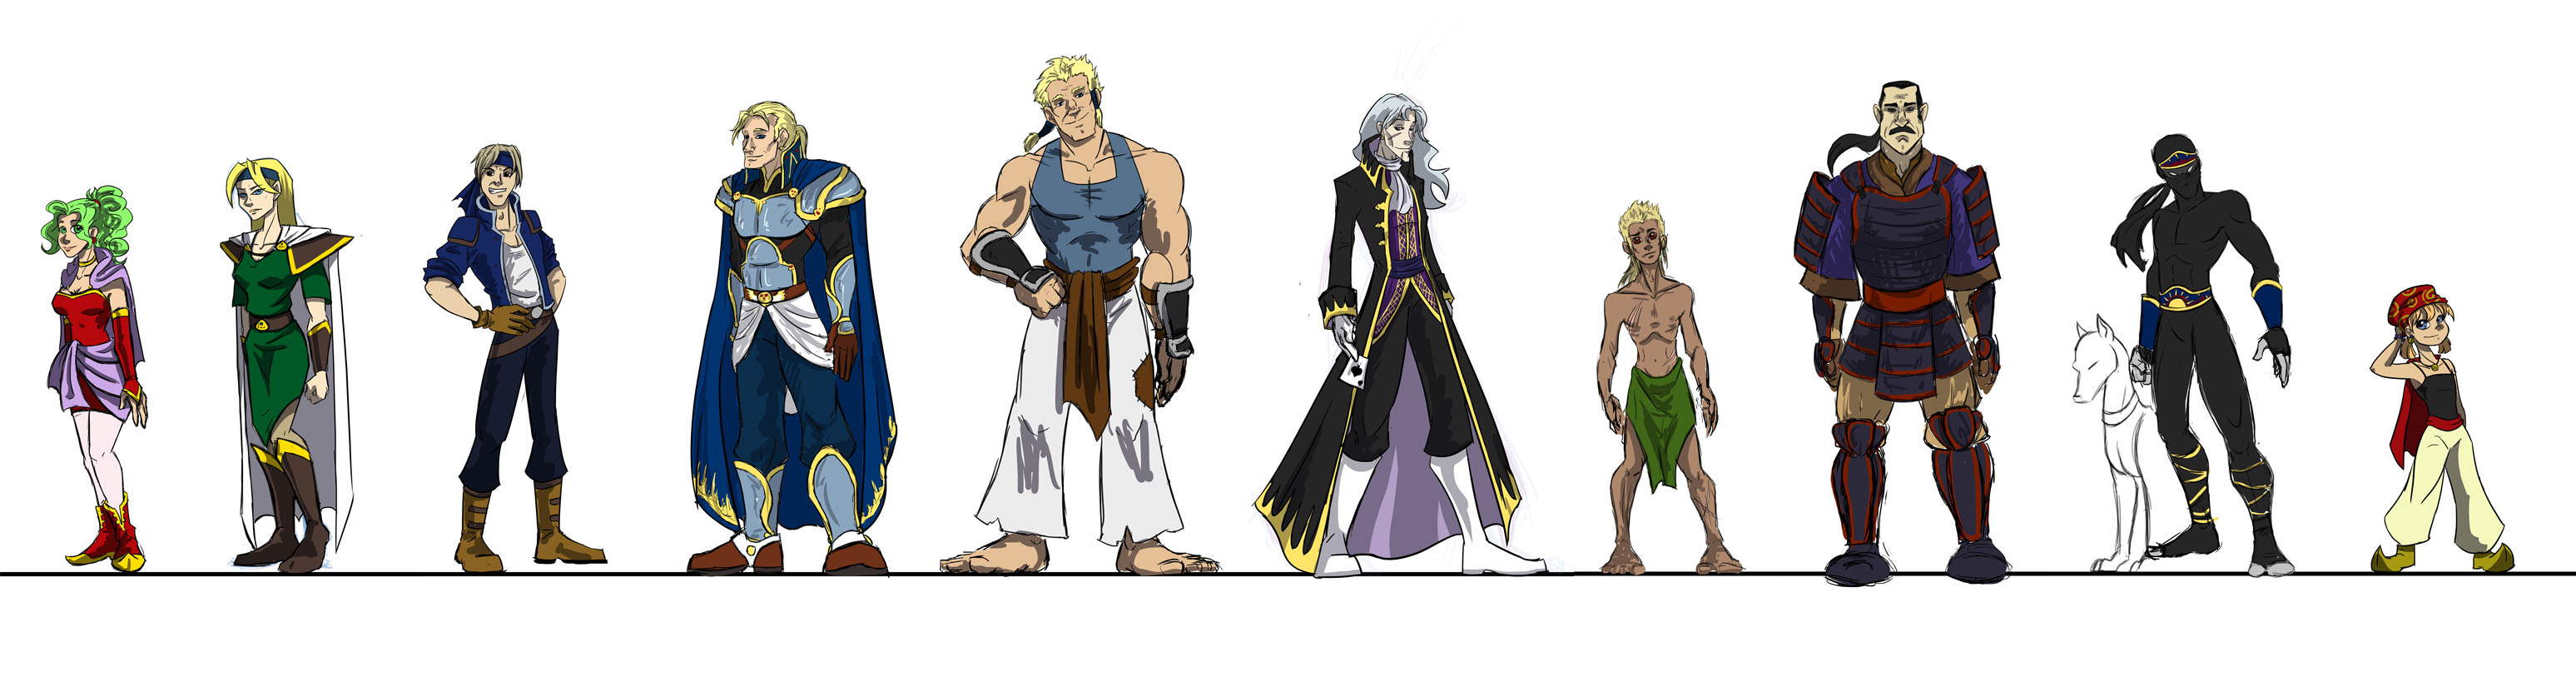 Ff6 Cast By Project